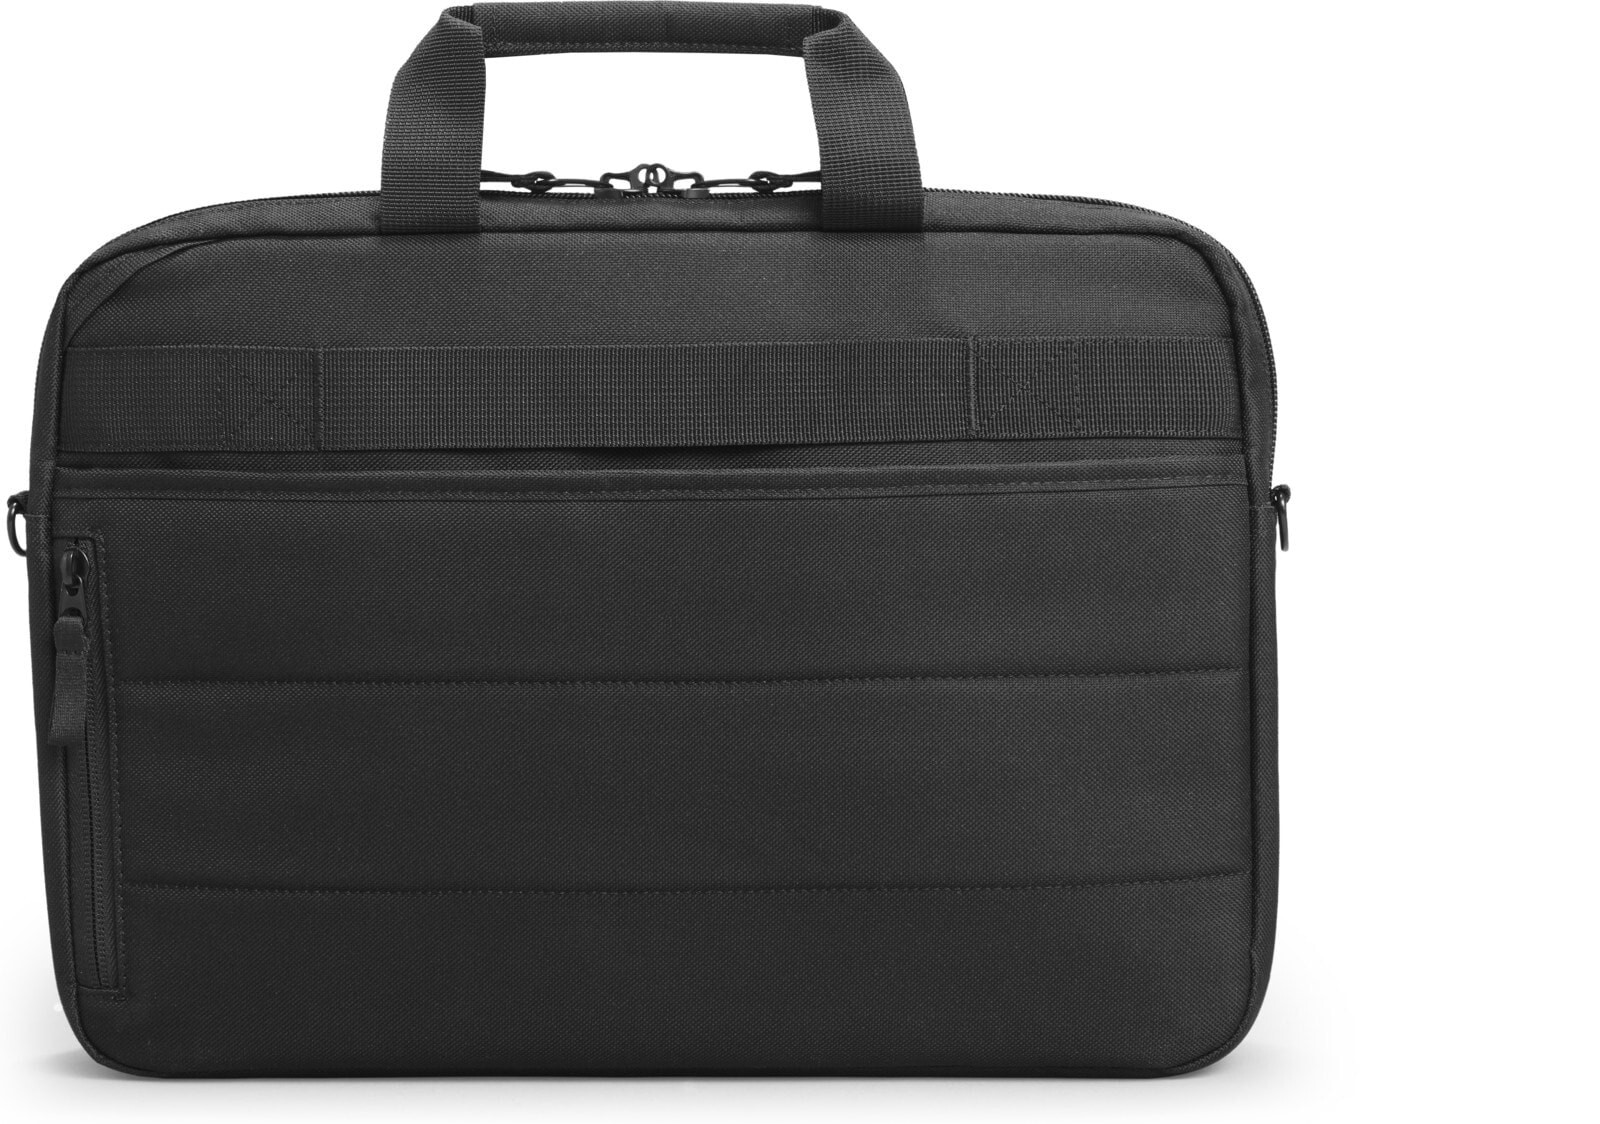 HP Professional 14.1-inch Laptop Bag 500S8AA